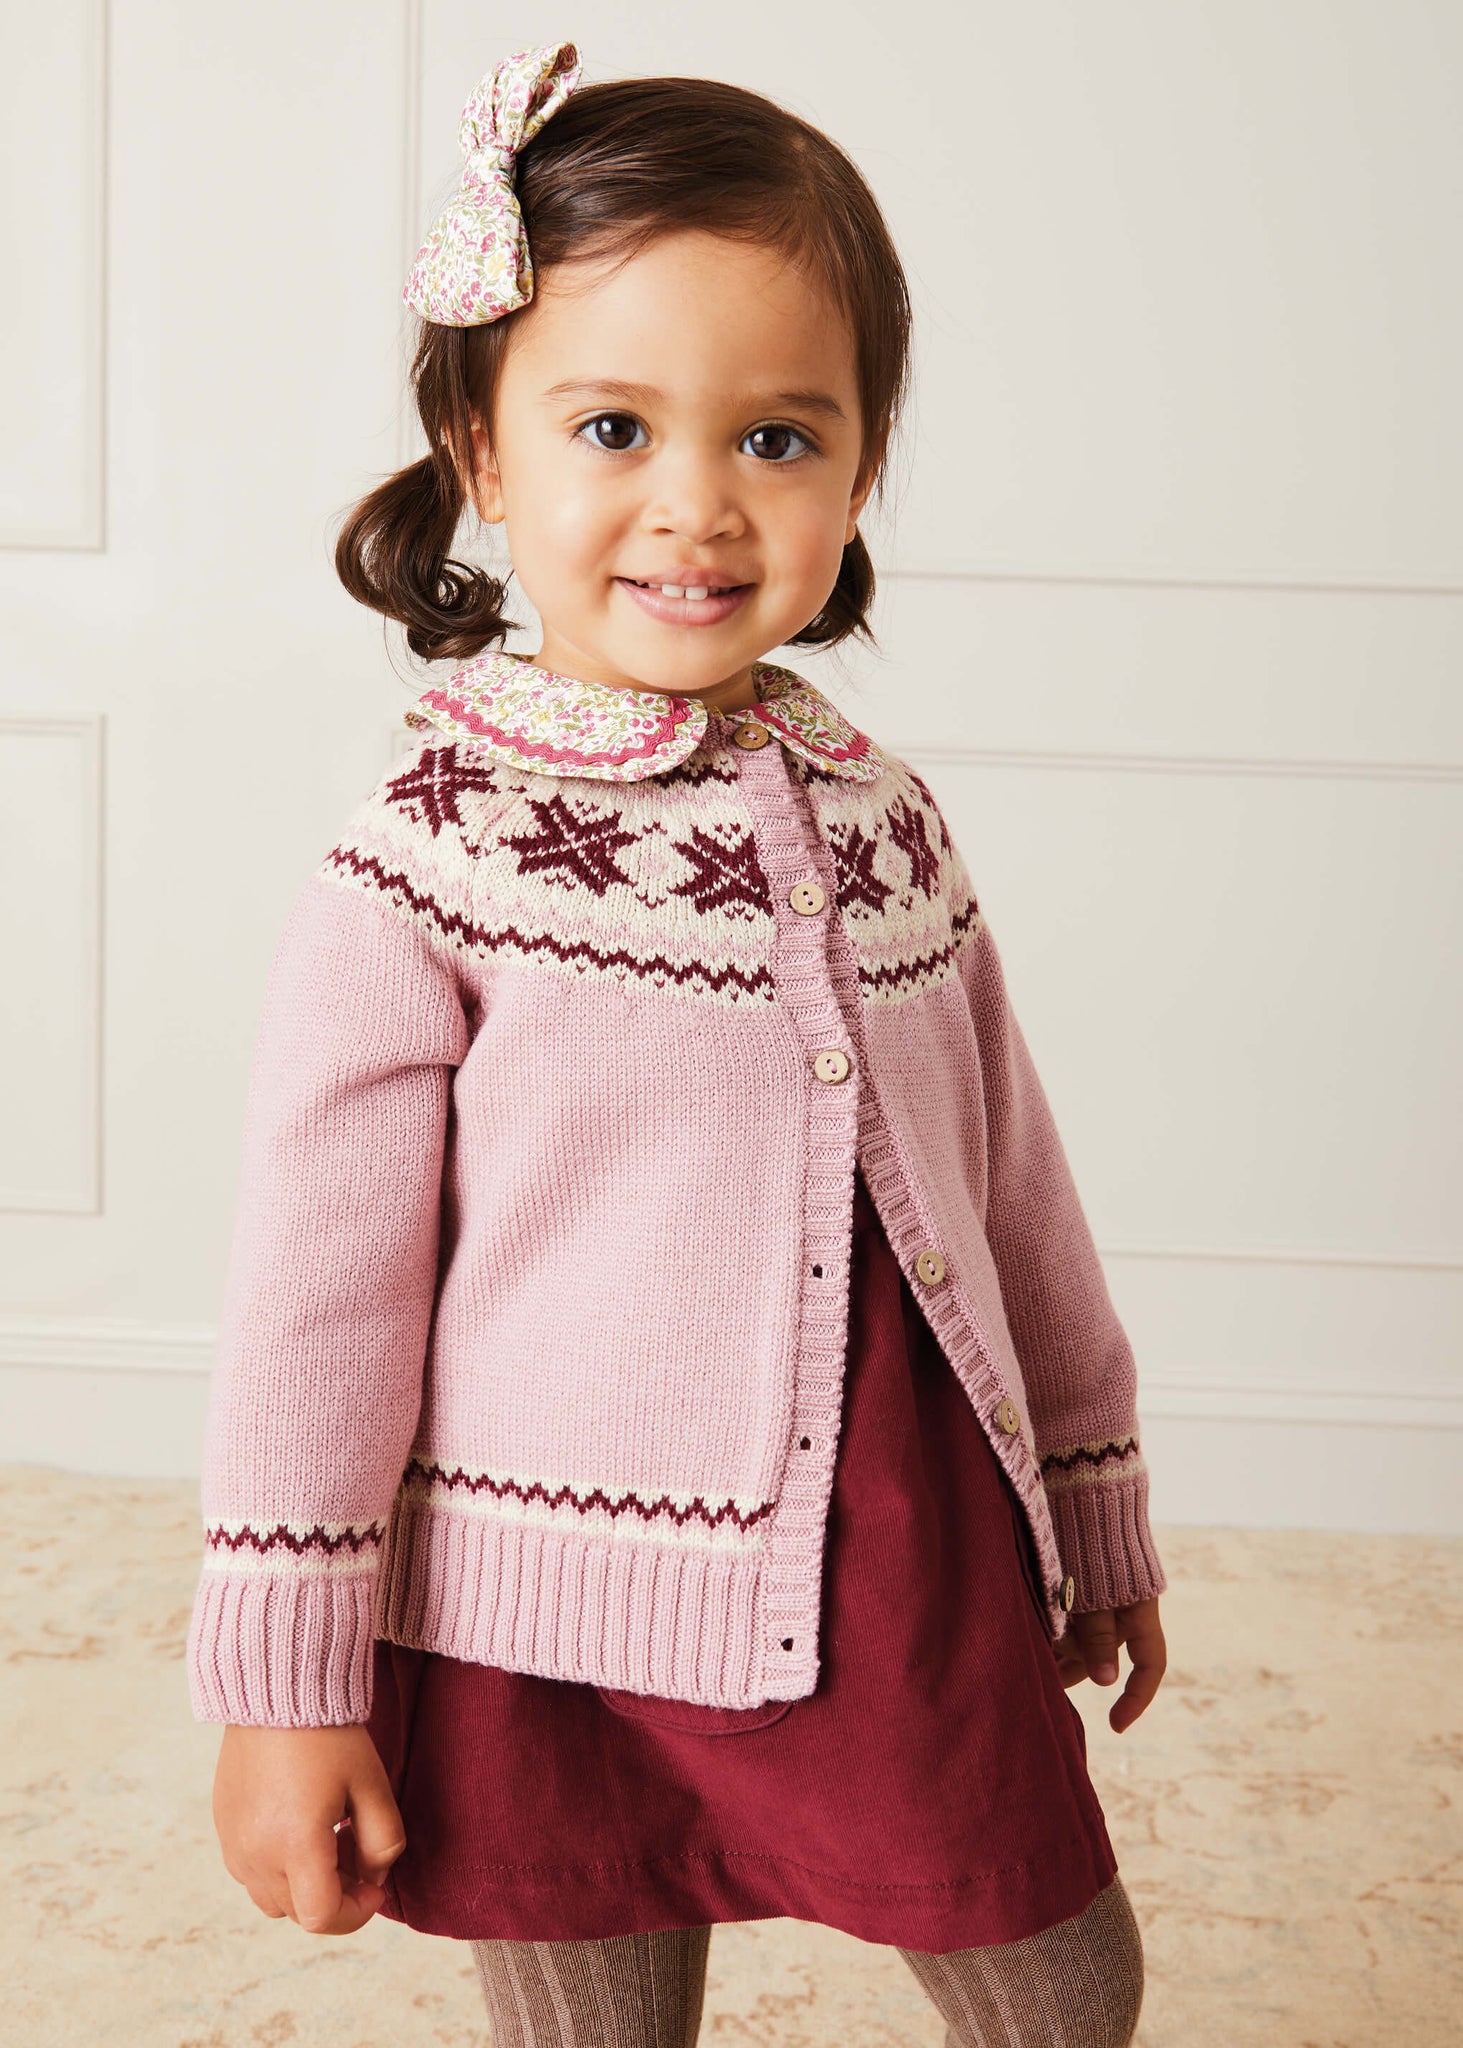 Classic Fair Isle Cardigan With Rib Details in Pink (12mths-10yrs) Knitwear  from Pepa London